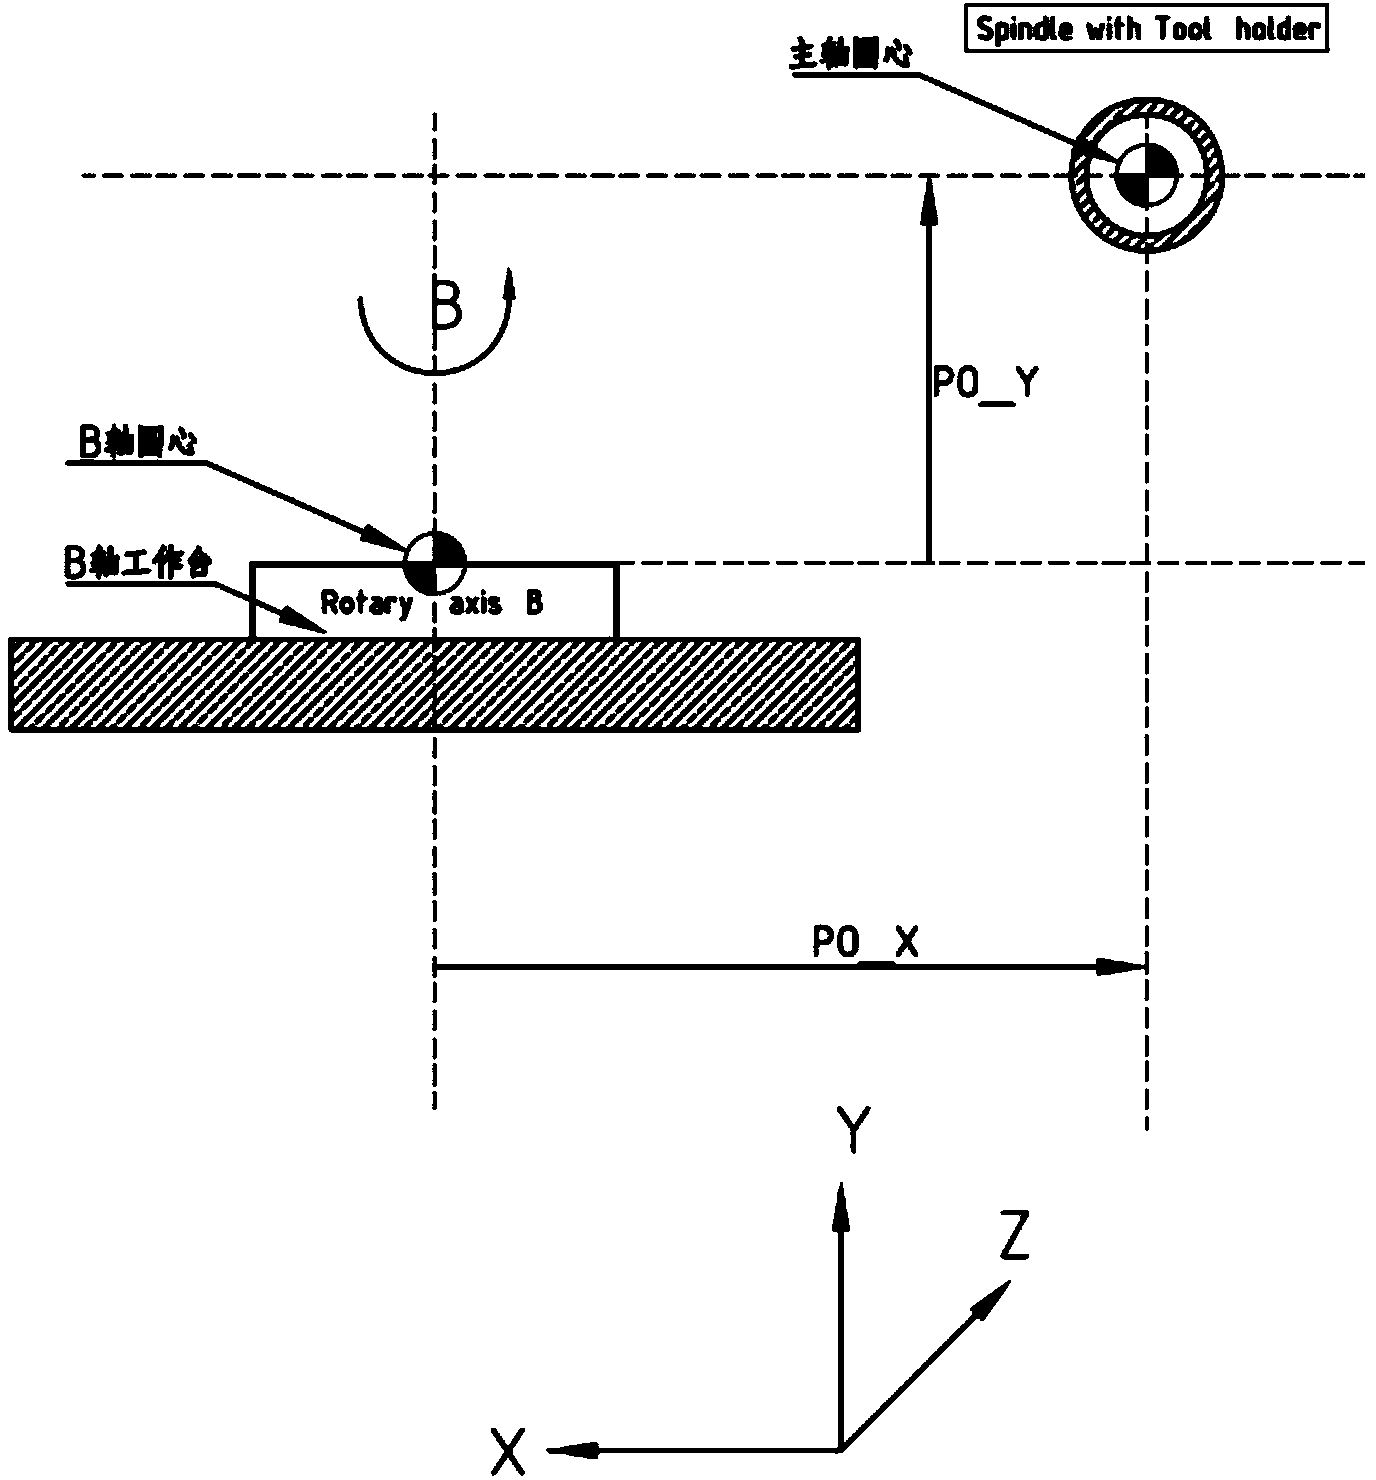 Method for achieving RTCP machining on four-axis horizontal-type machining center